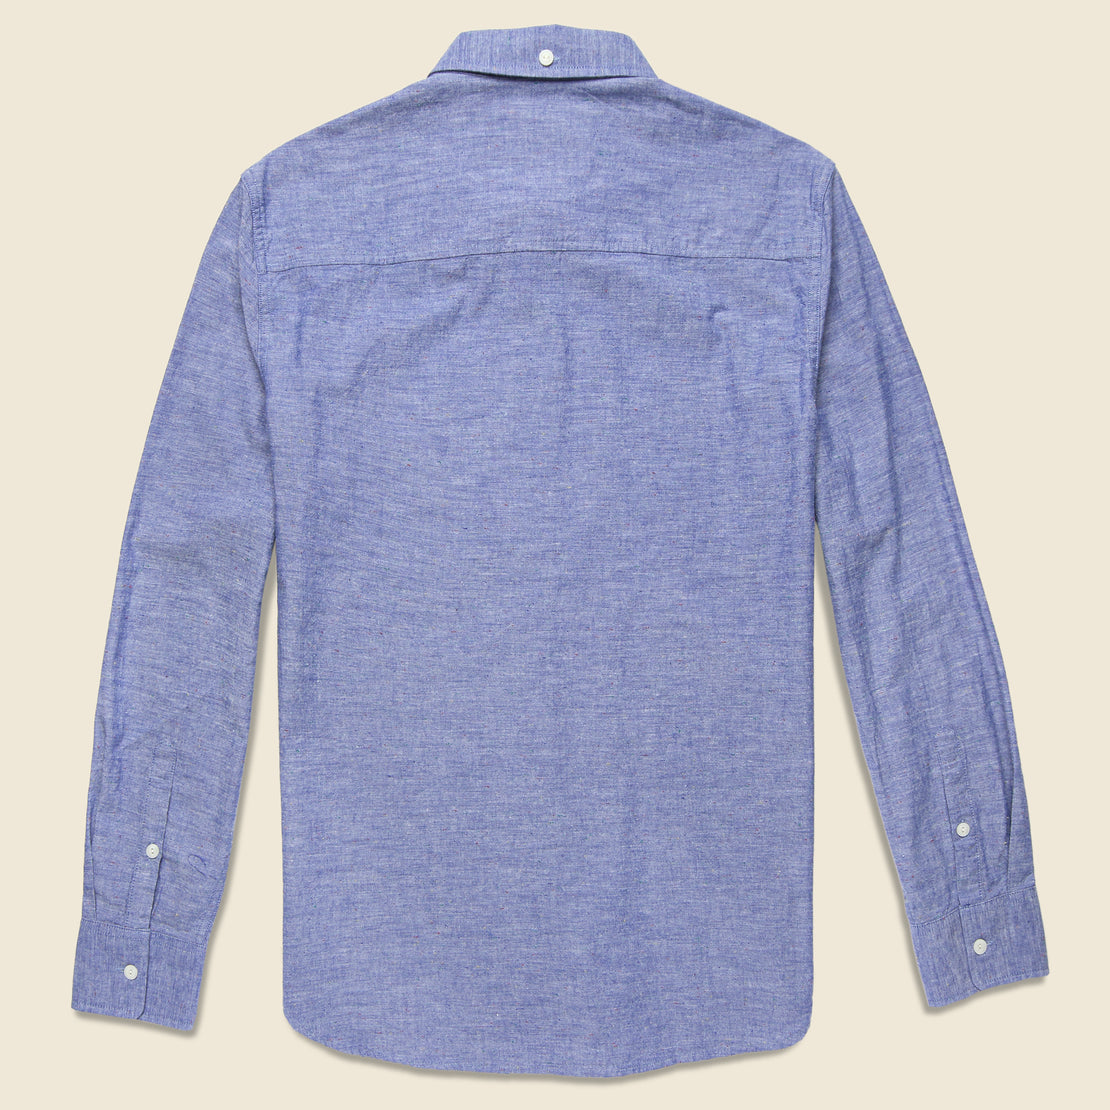 Hadley Shirt - Blue - Penfield - STAG Provisions - Tops - L/S Woven - Fleck